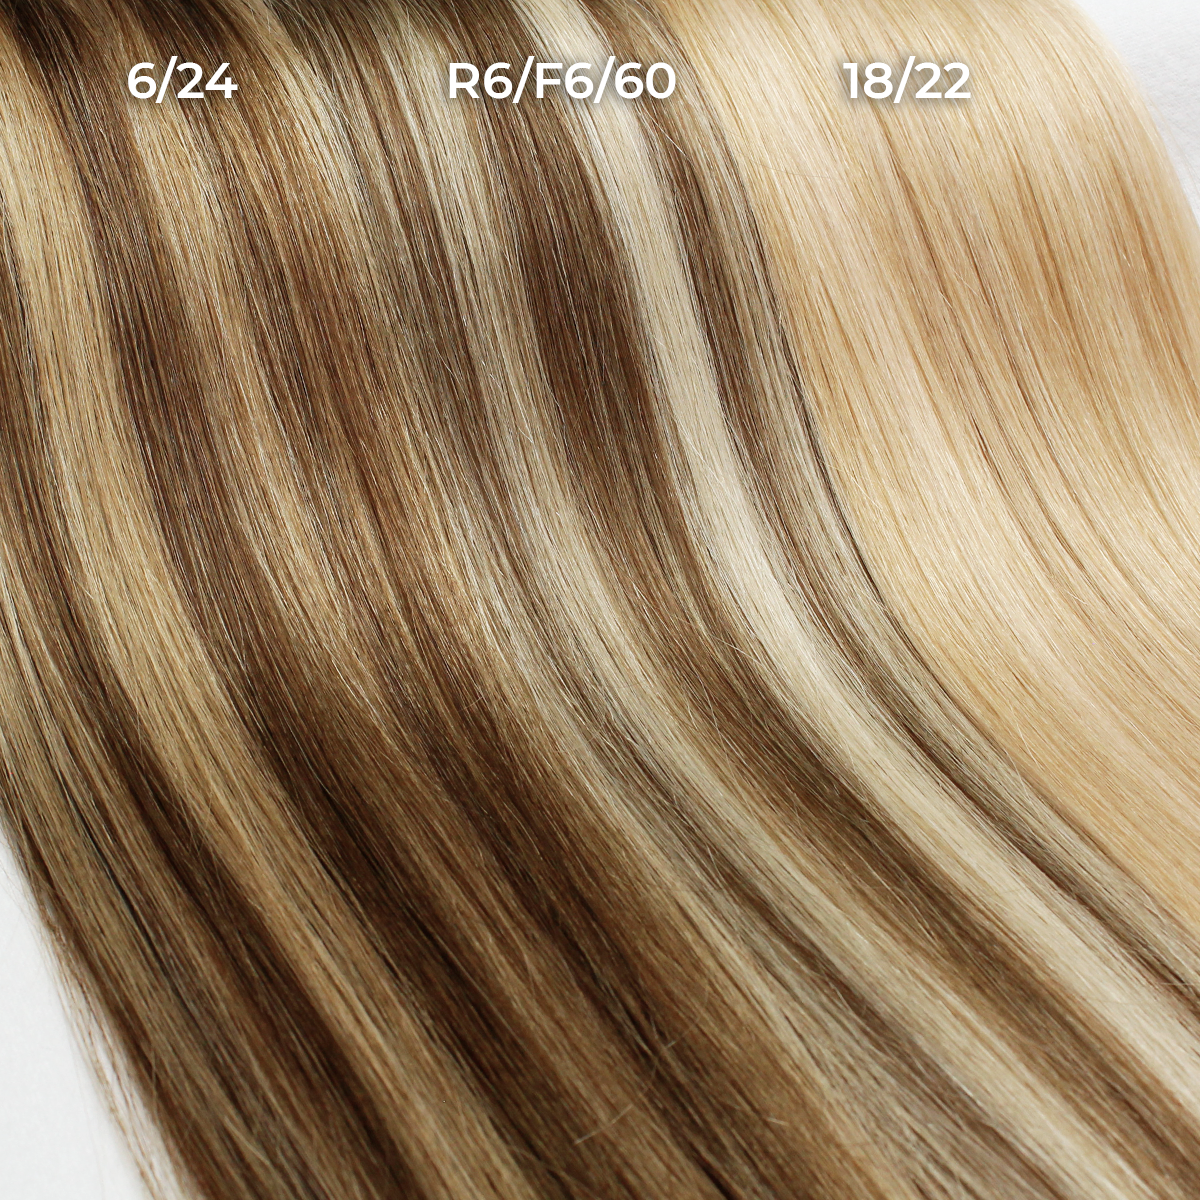 18 Inch Bliss Micro Fine Wefts - Hand Tied Straight 52g | 100% Remy Human Hair